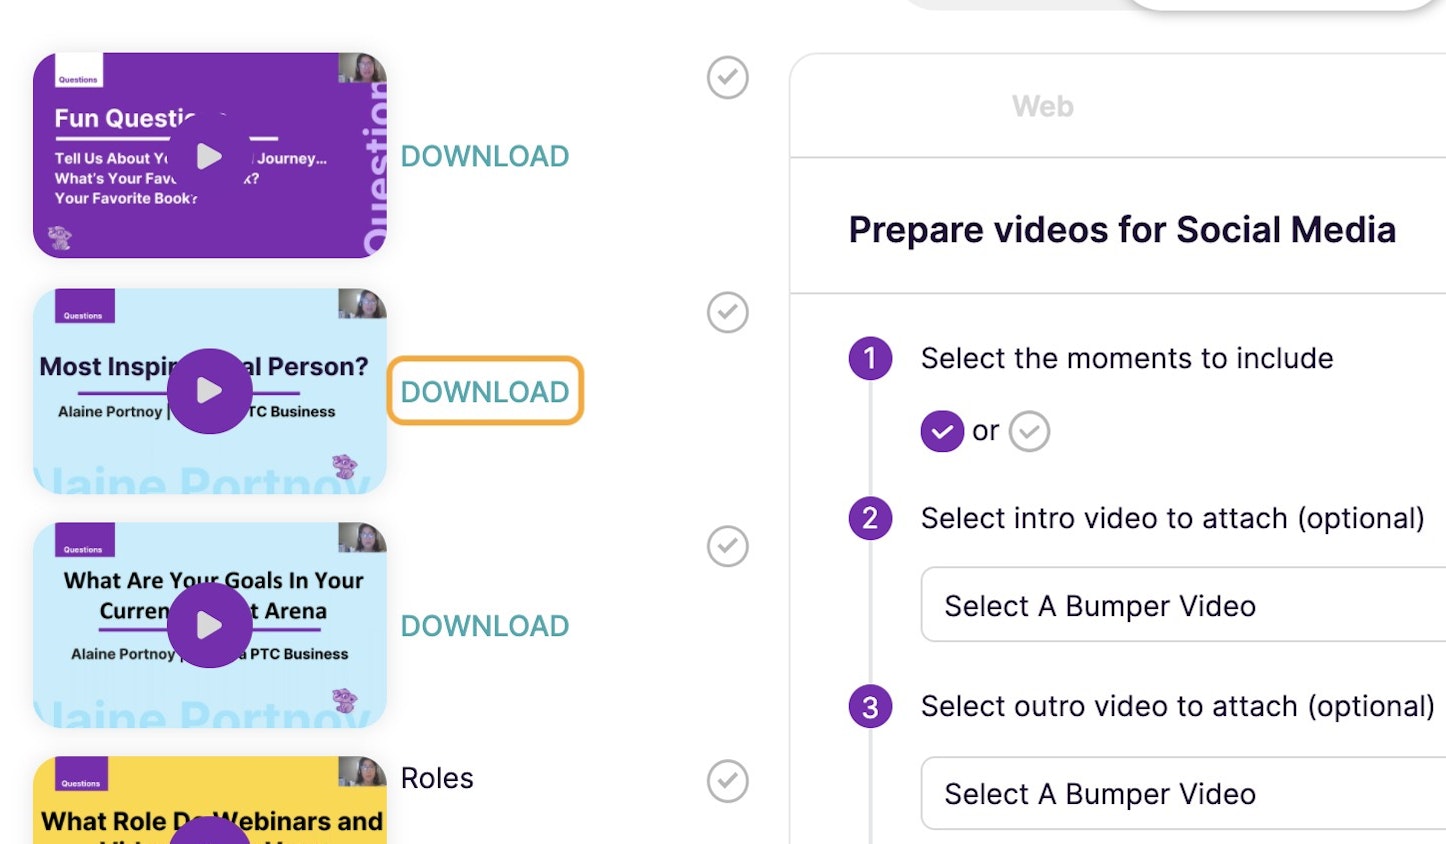 Select the Moment you want to feature and click DOWNLOAD.